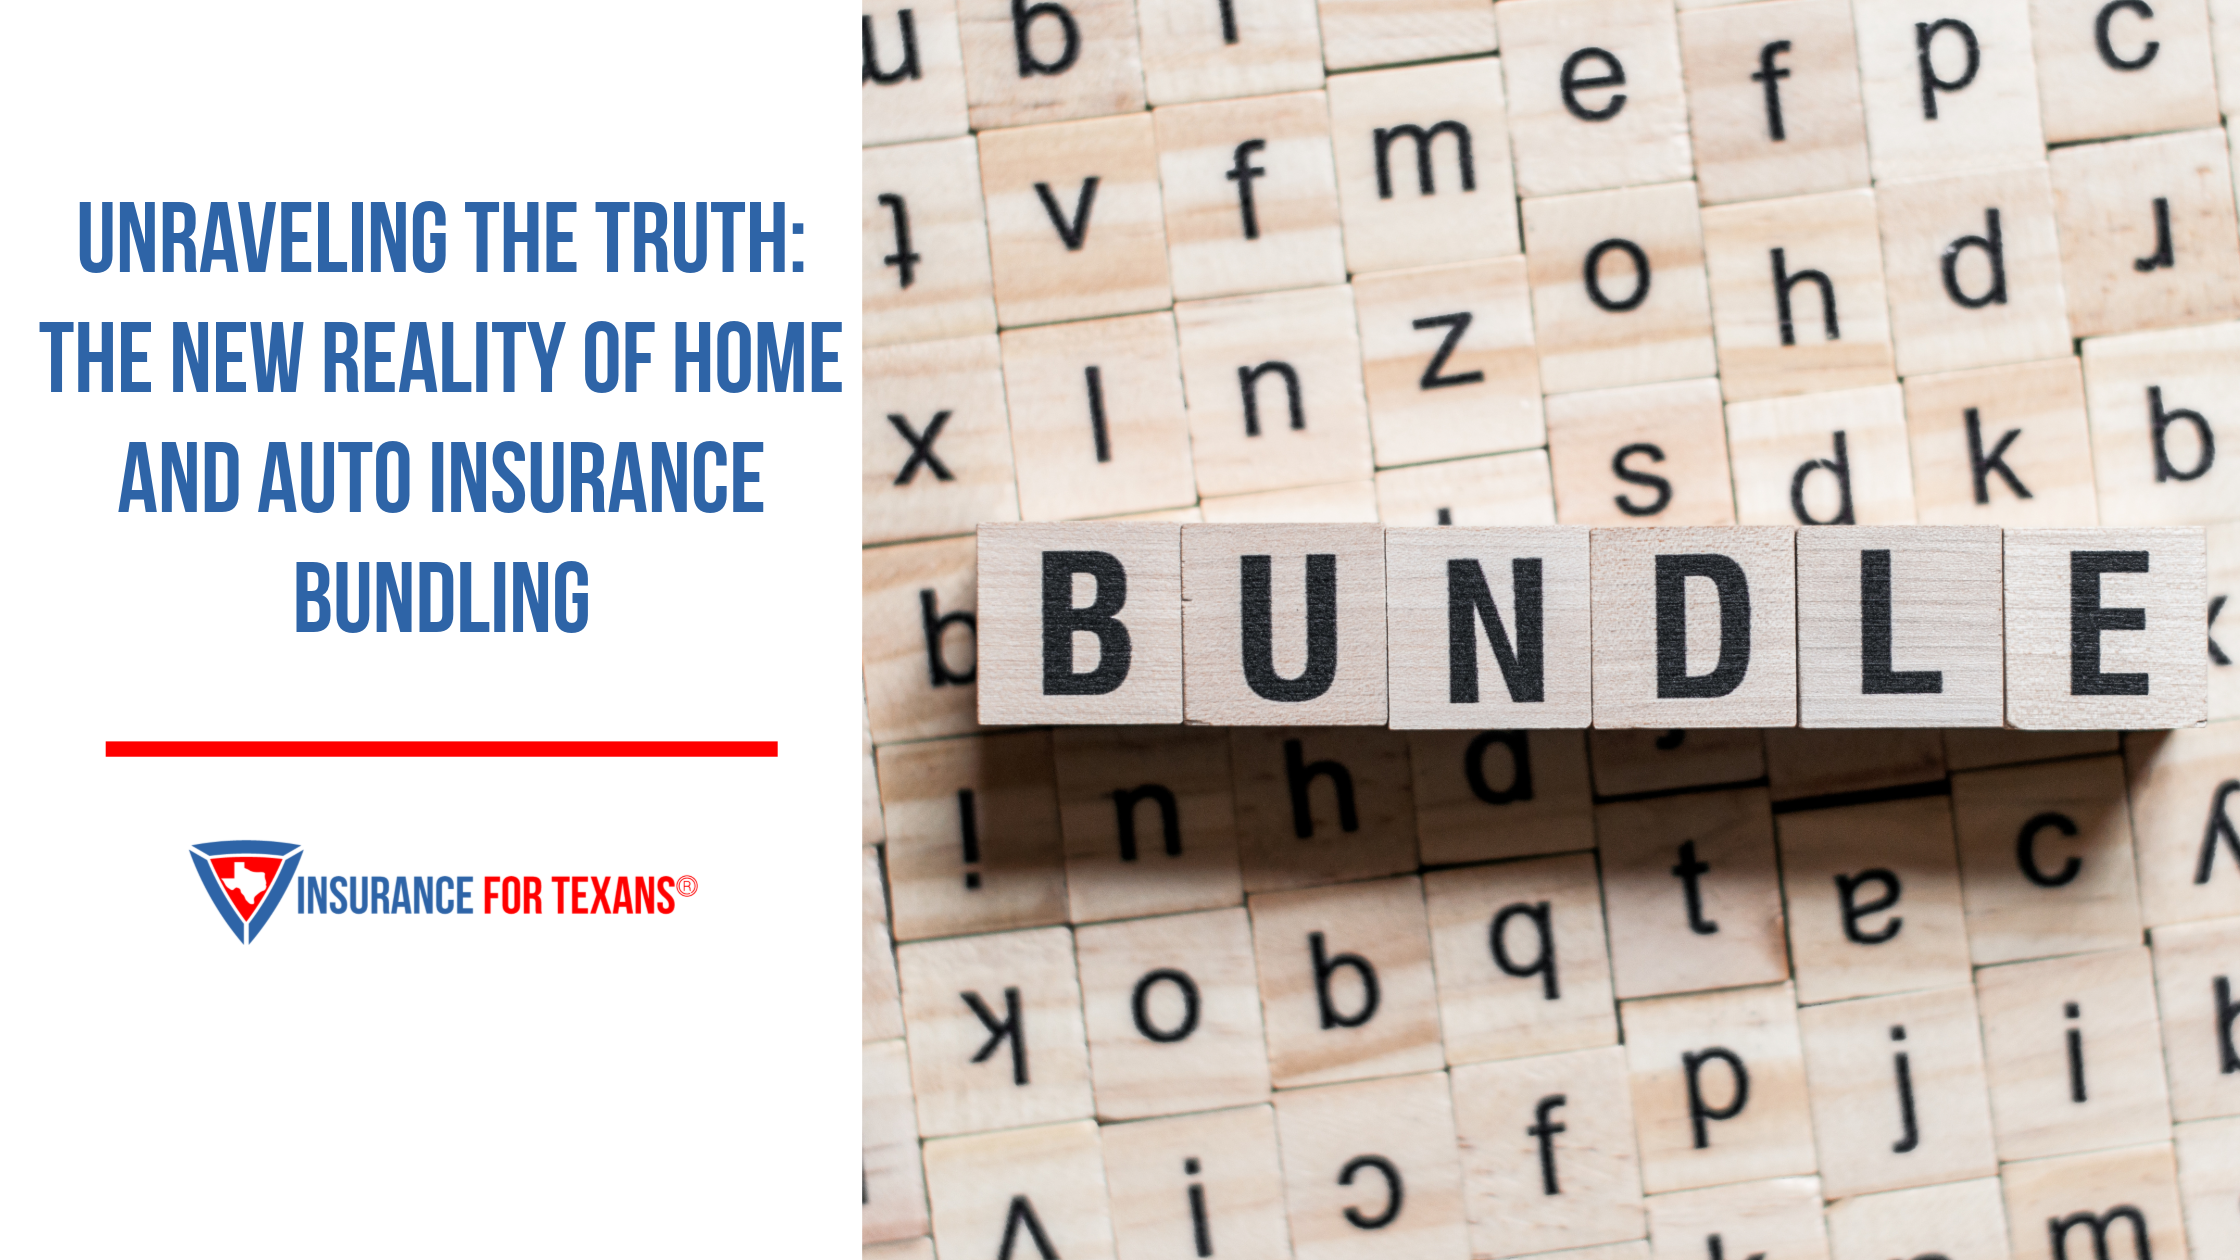 Unraveling the Truth: The New Reality of Home and Auto Insurance Bundling